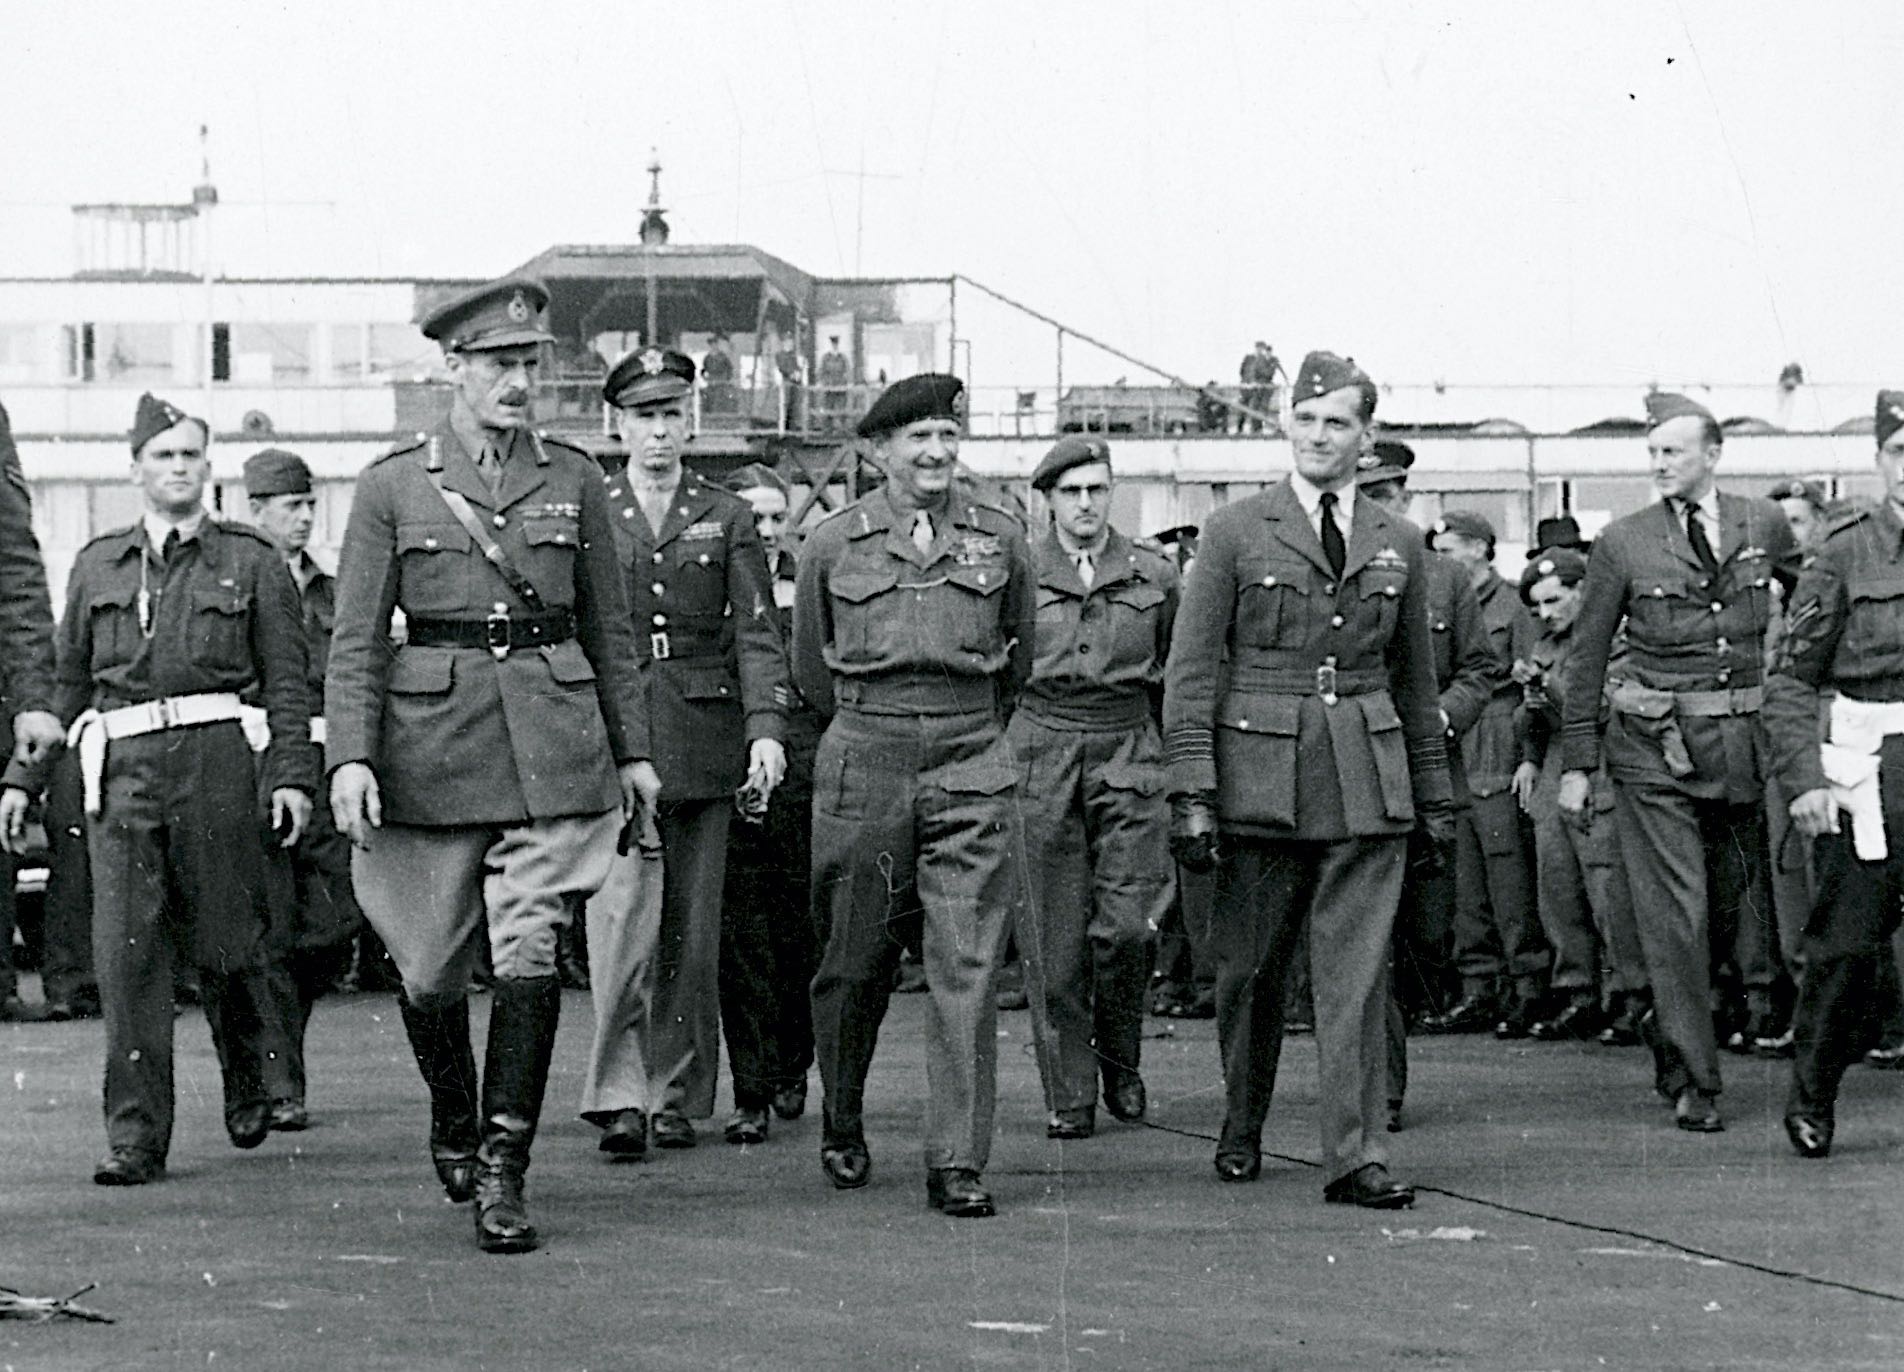 Field Marshall Montgomery visited Copenhagen on 12 May 1945. He was cheered as a celebrity from arrival to departure. This photo is captured in Copenhagen/Kastrup airport shortly before departure. To the right Flt Lt Vagn Christensen is seen guarding Montgomery, who is flanked by Gen. Dewing and Gp Cpt. Johnnie Johnson (Museum of Danish Resistance).